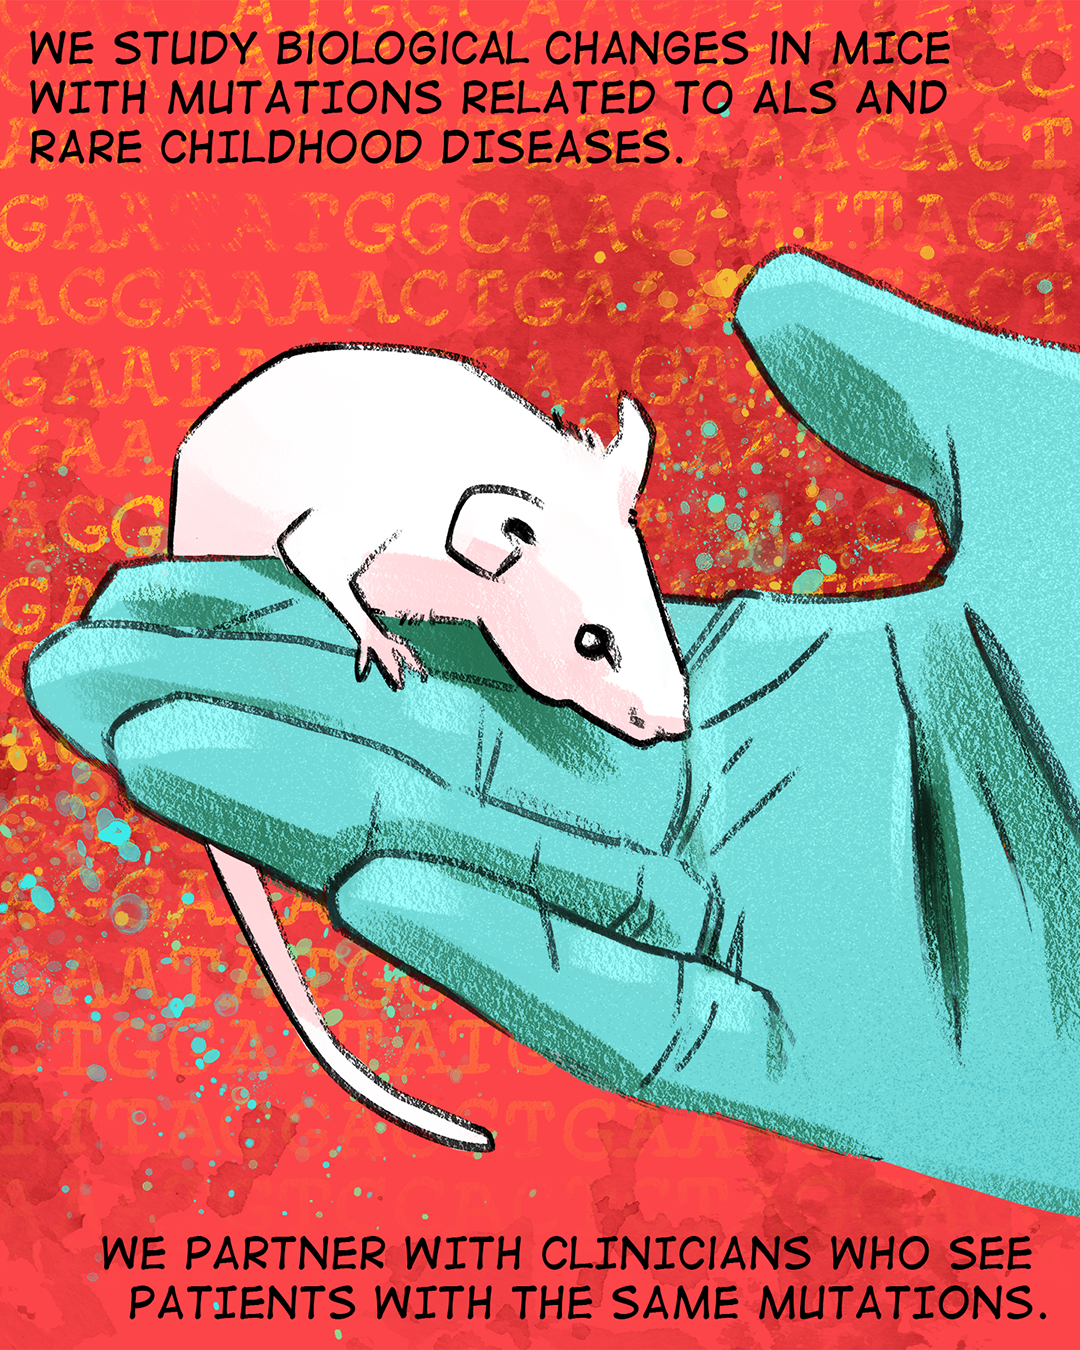 Illustration of a gloved hand holding a mouse